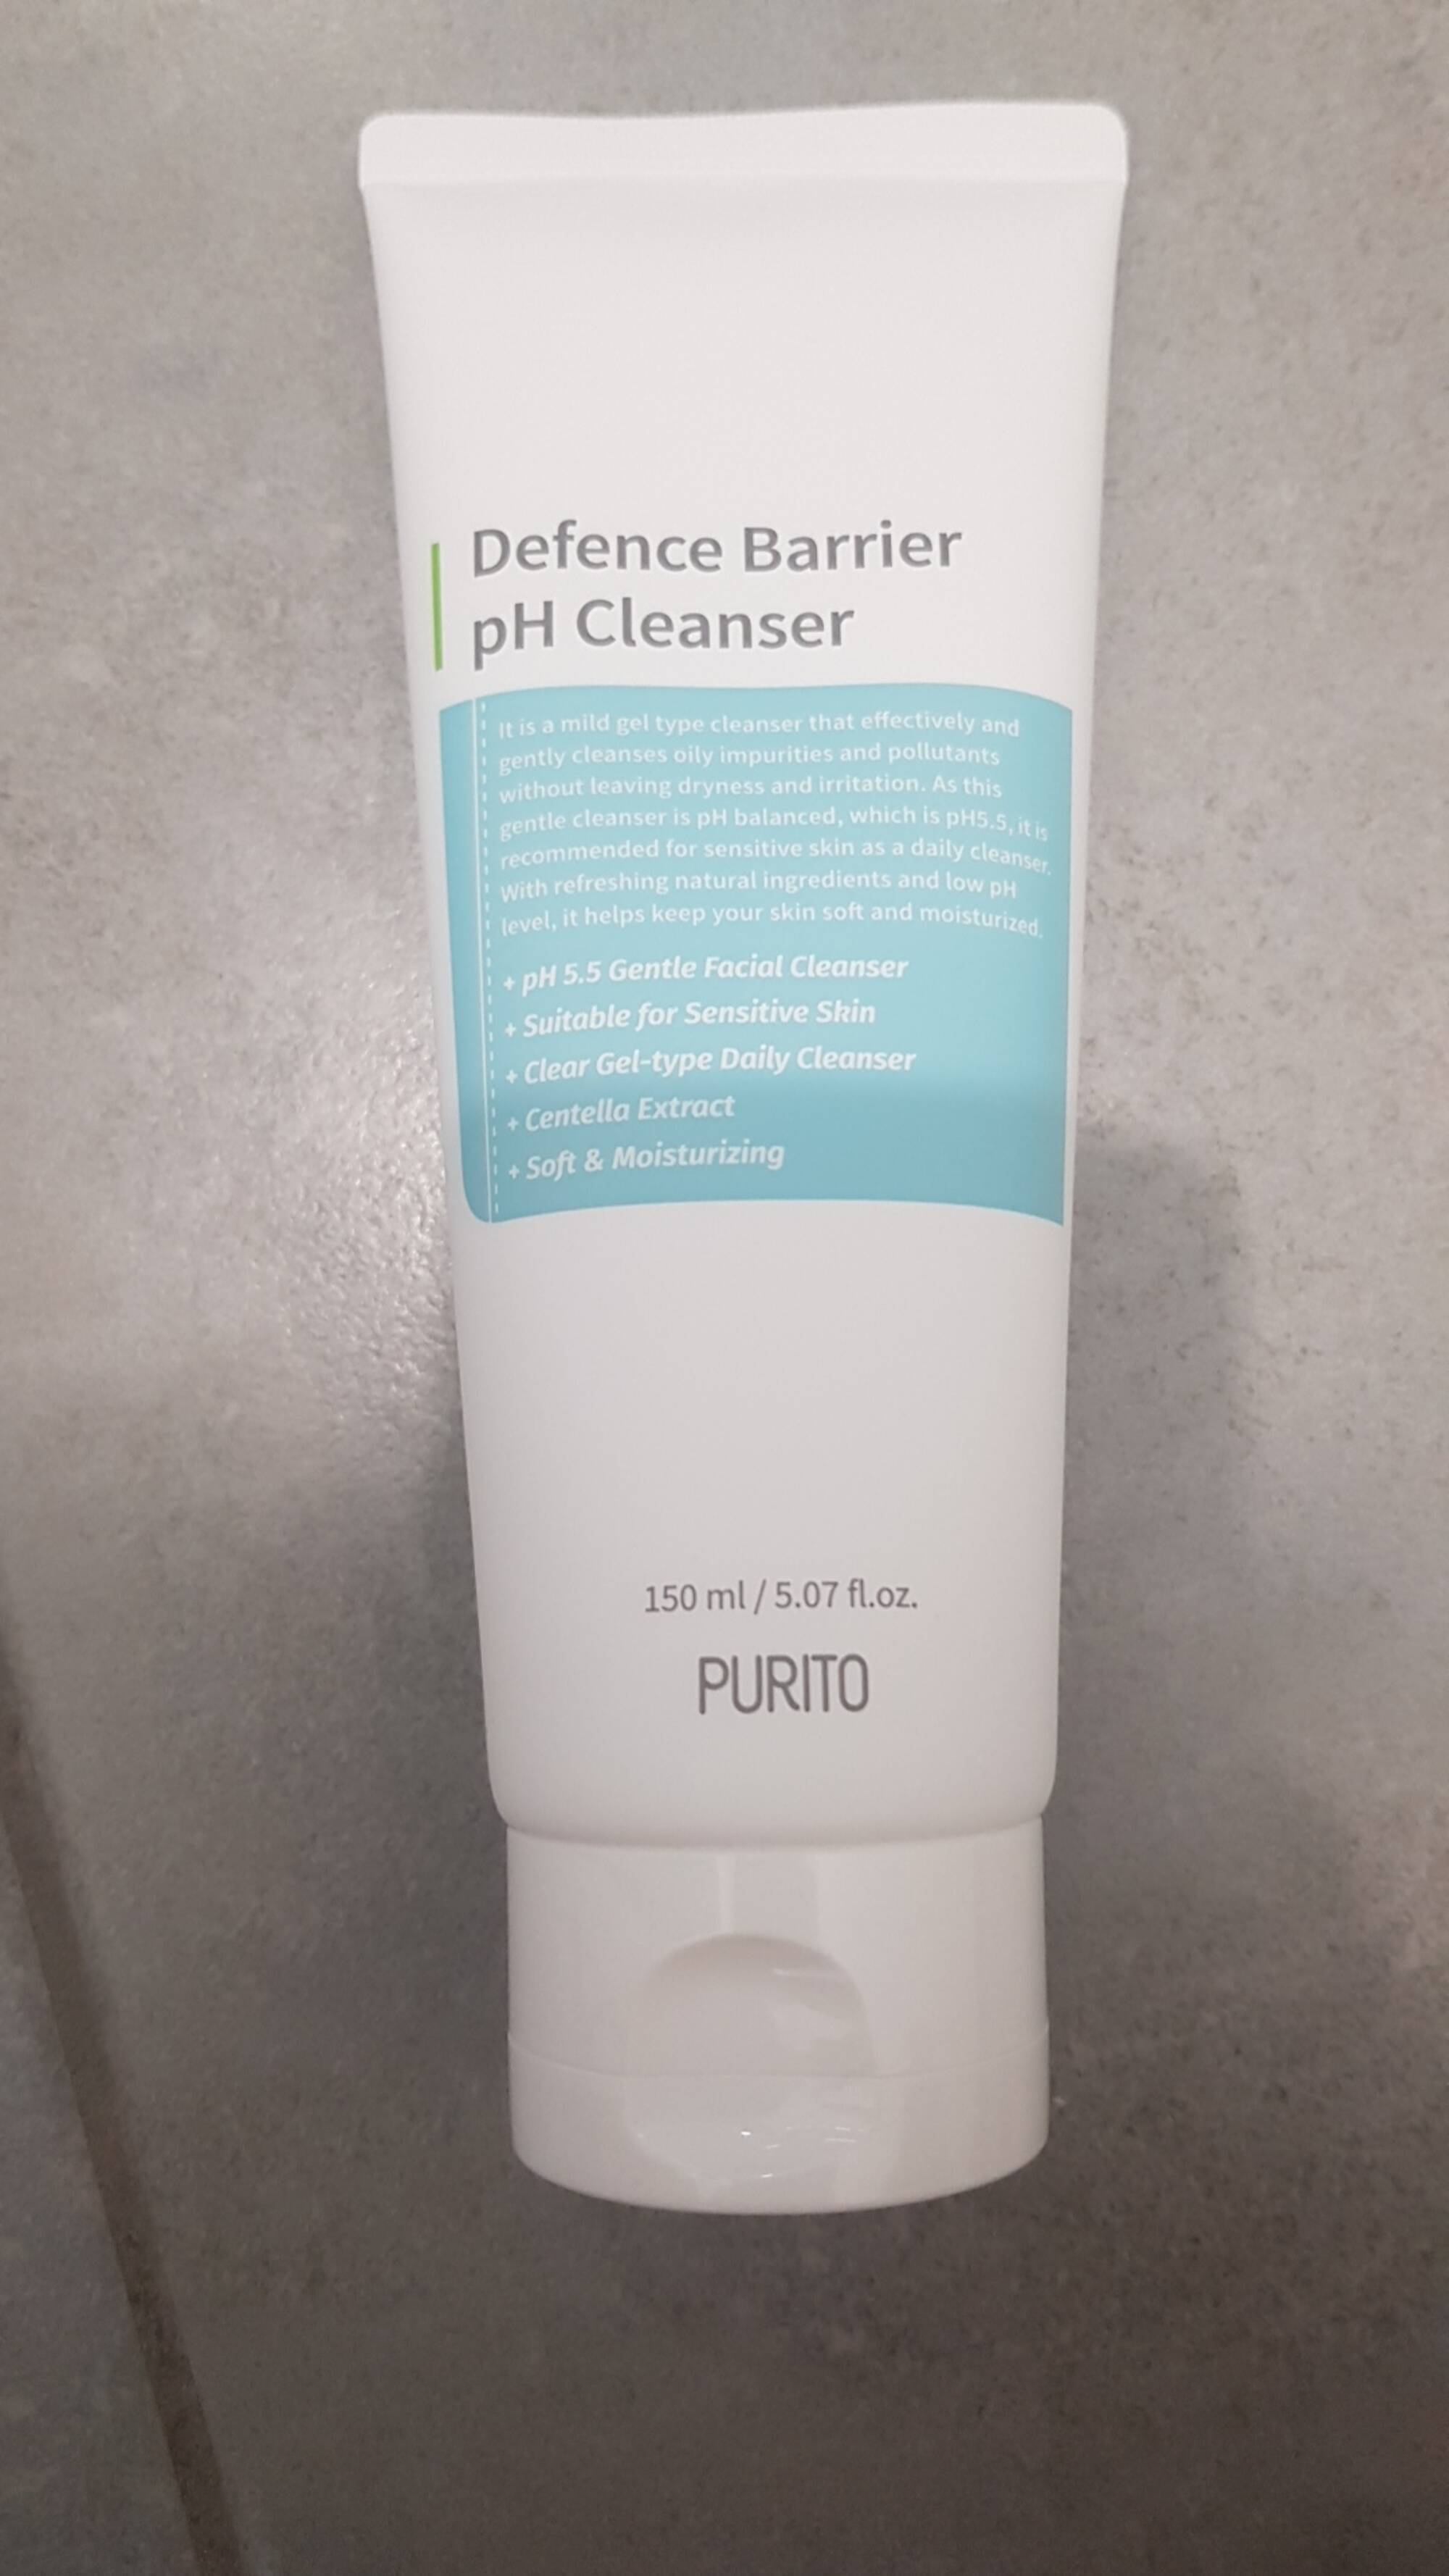 PURITO - Defence barrier ph cleanser - pH5.5 Gentle facial cleanser